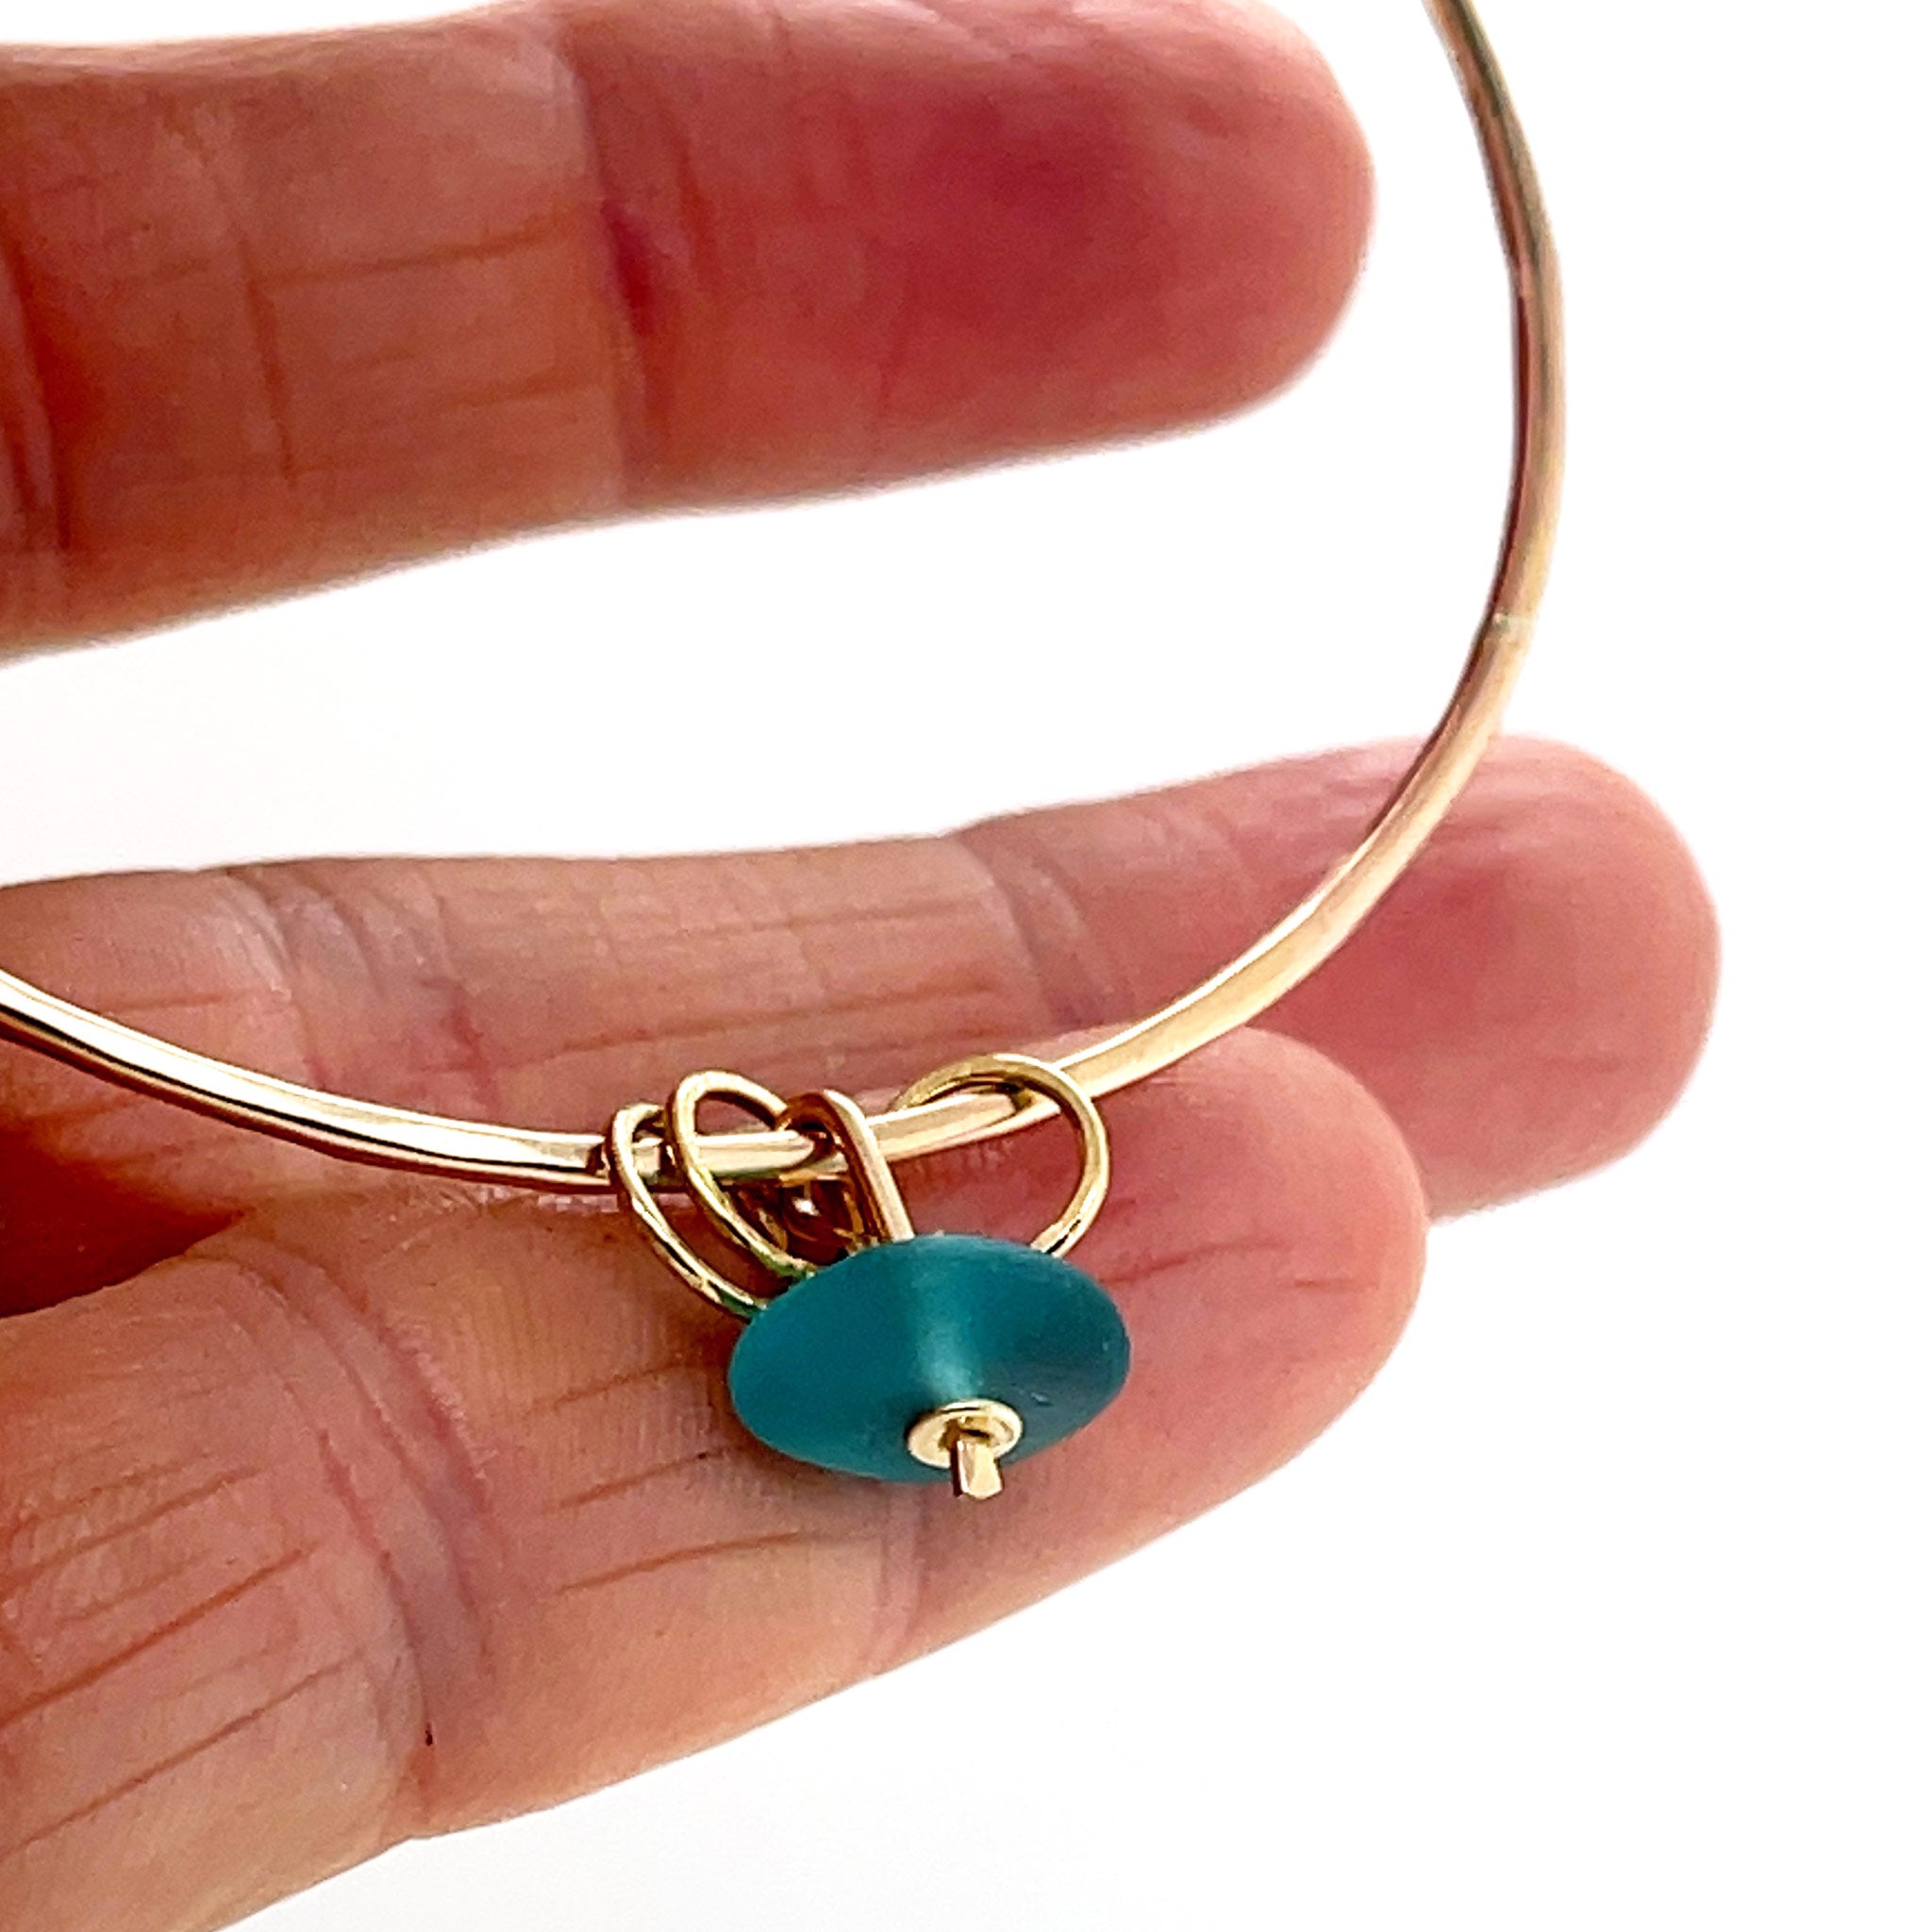 Chic Turquoise Sea Glass Gold Charm Bracelet – Artisan-Crafted Bangle with Circle Charms for a Modern Touch